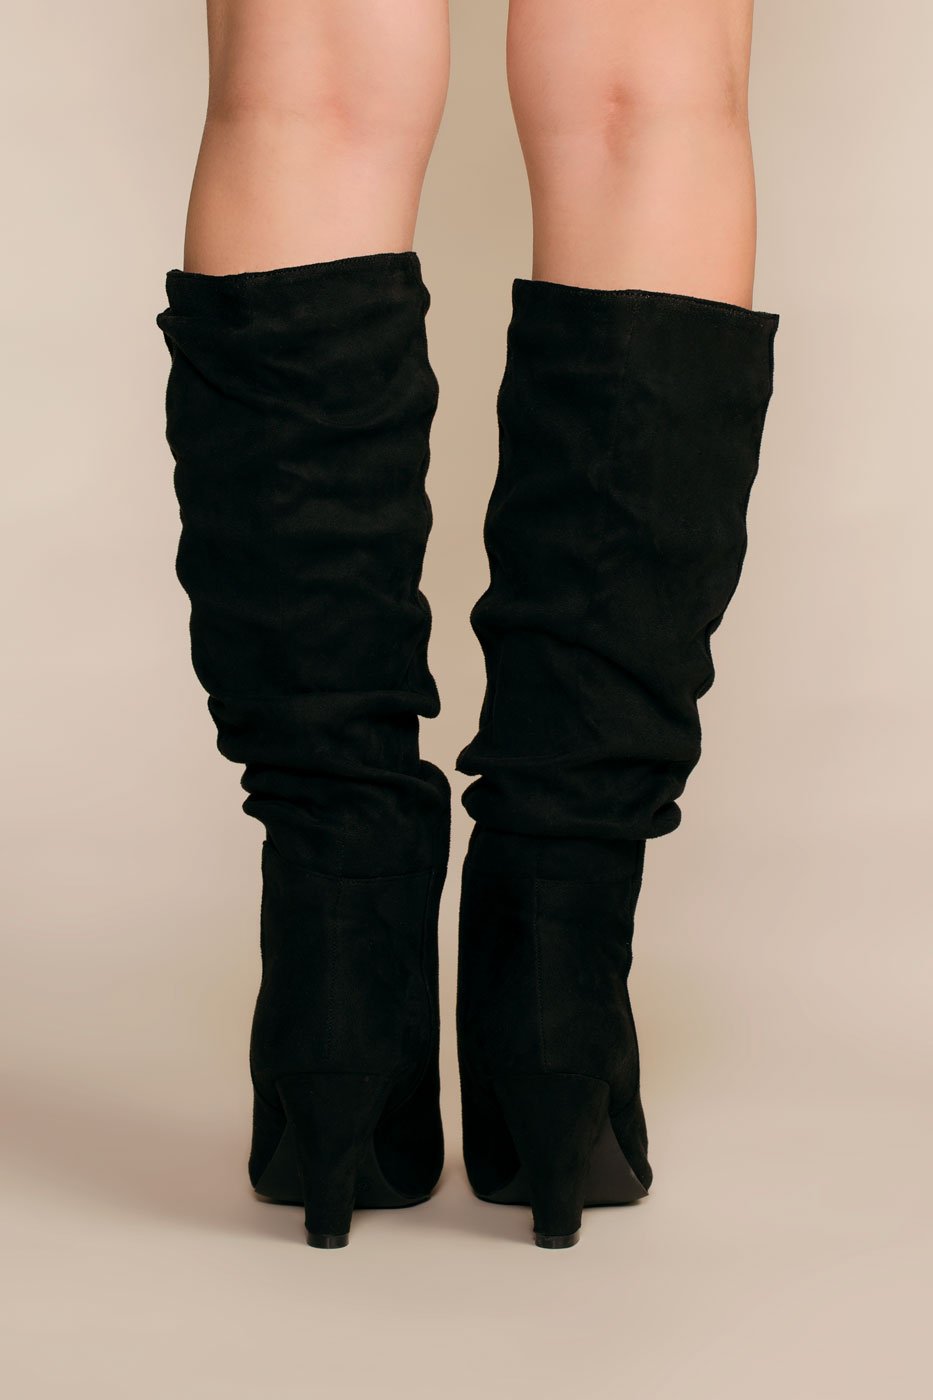 Boots - Cassie Pointy Toe Slouchy Boots